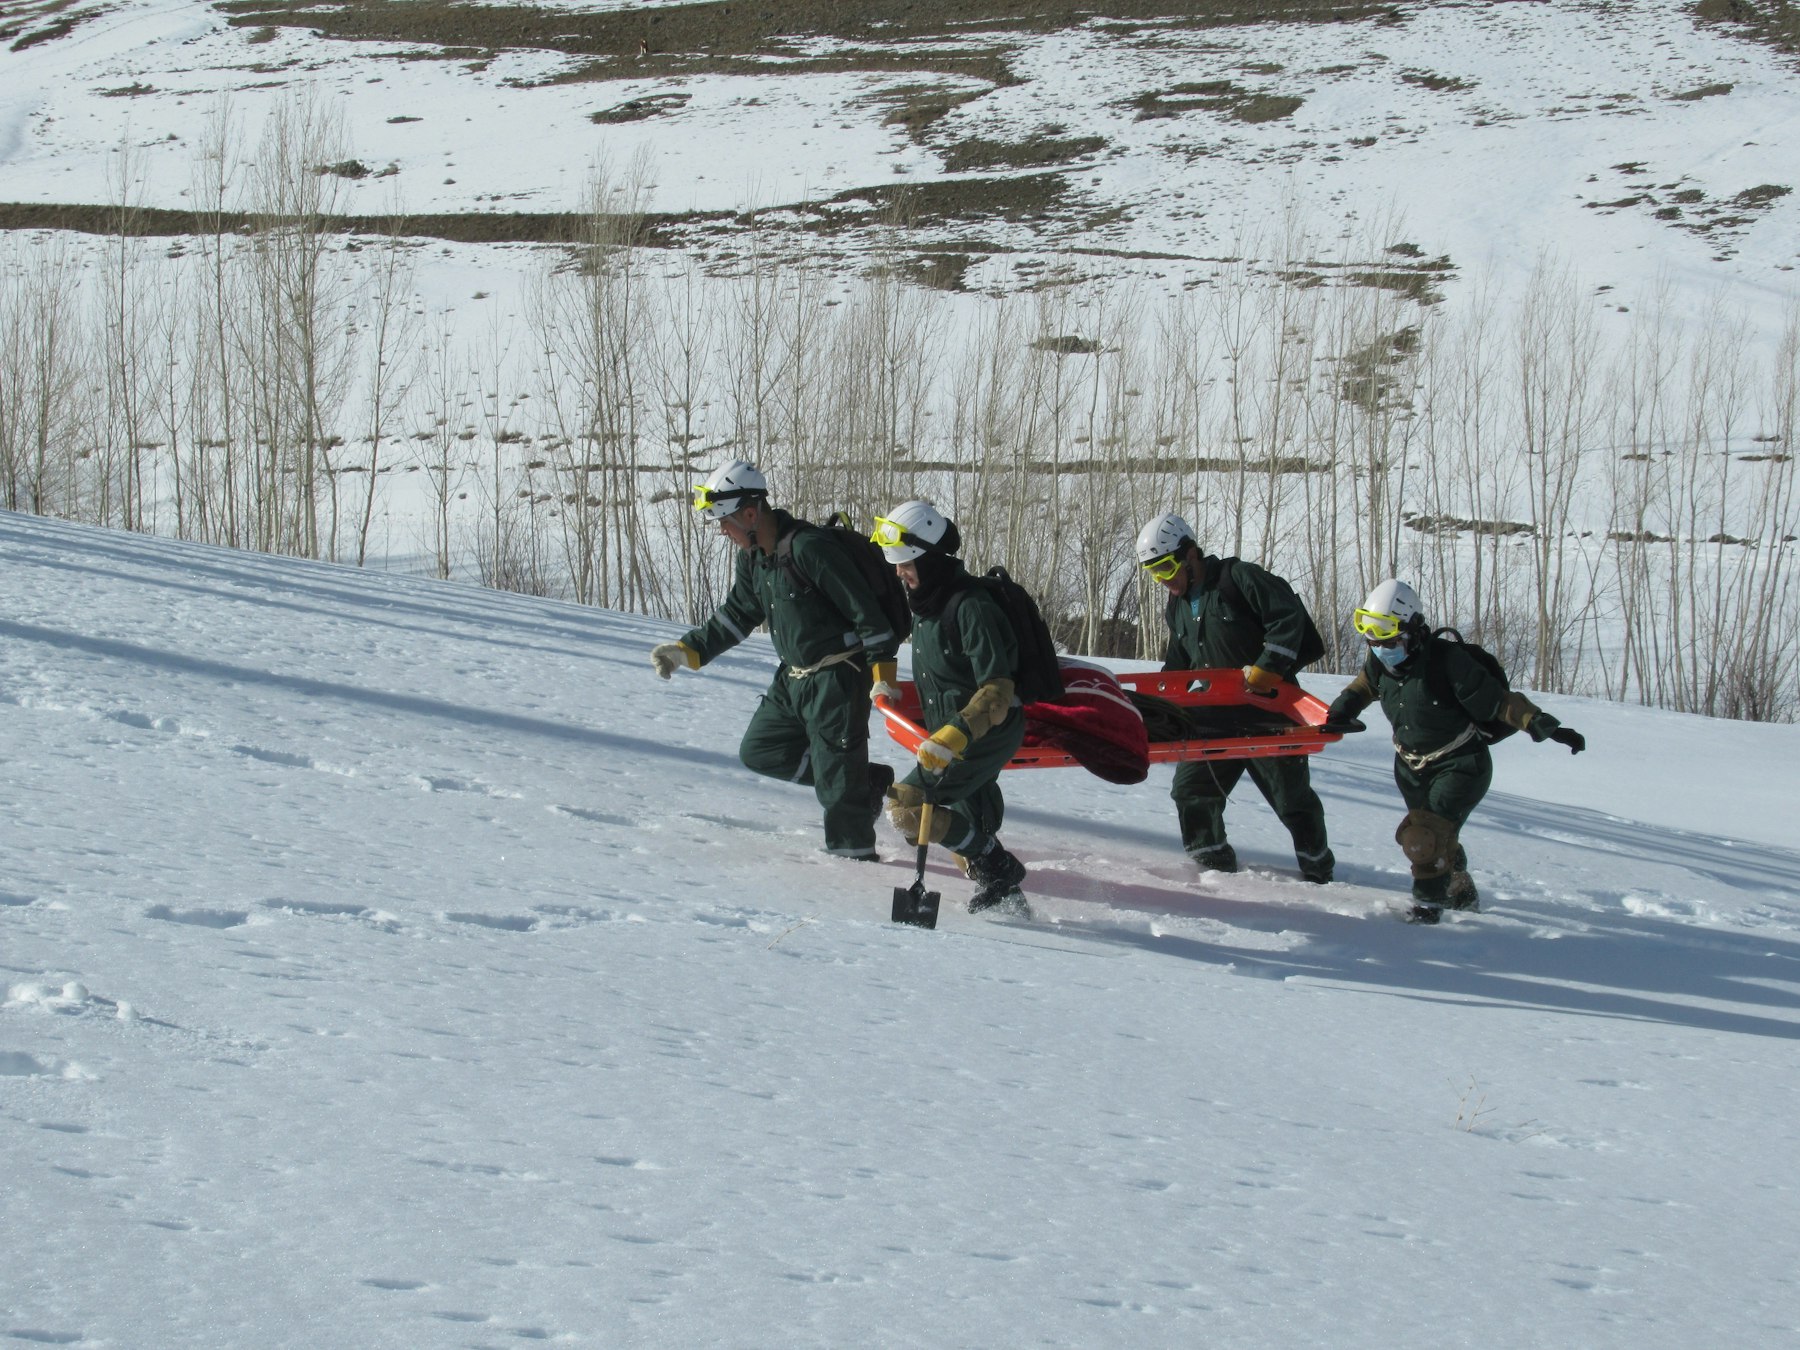 An AKAH search and rescue team conducting a simulation mock drill in Baghlan Province, Afghanistan. Photo credit: AKAH Afghanistan